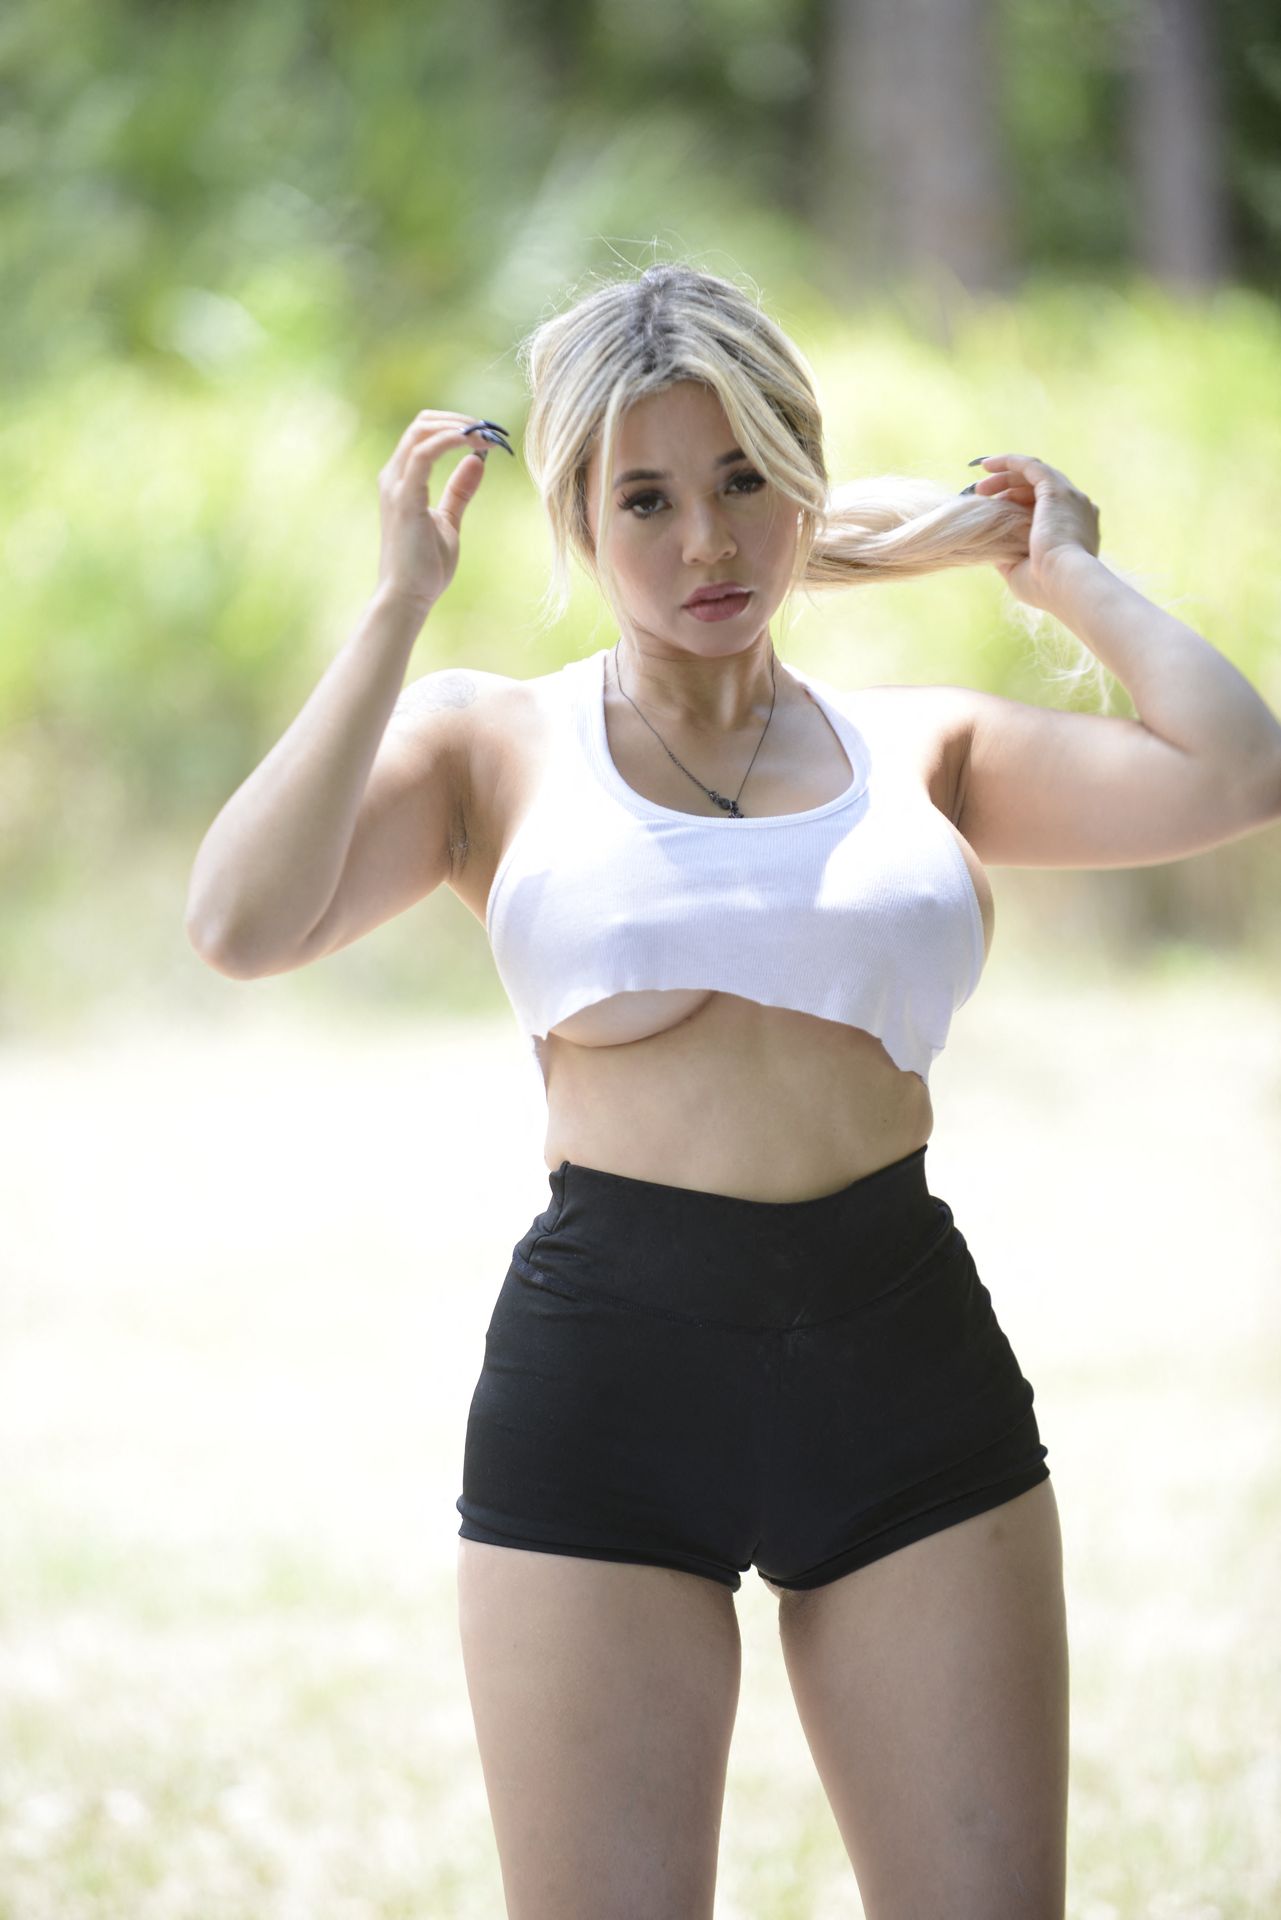 Bella Bunnie Amor is Pictured Stretching at The Park in Miami (27 Photos)